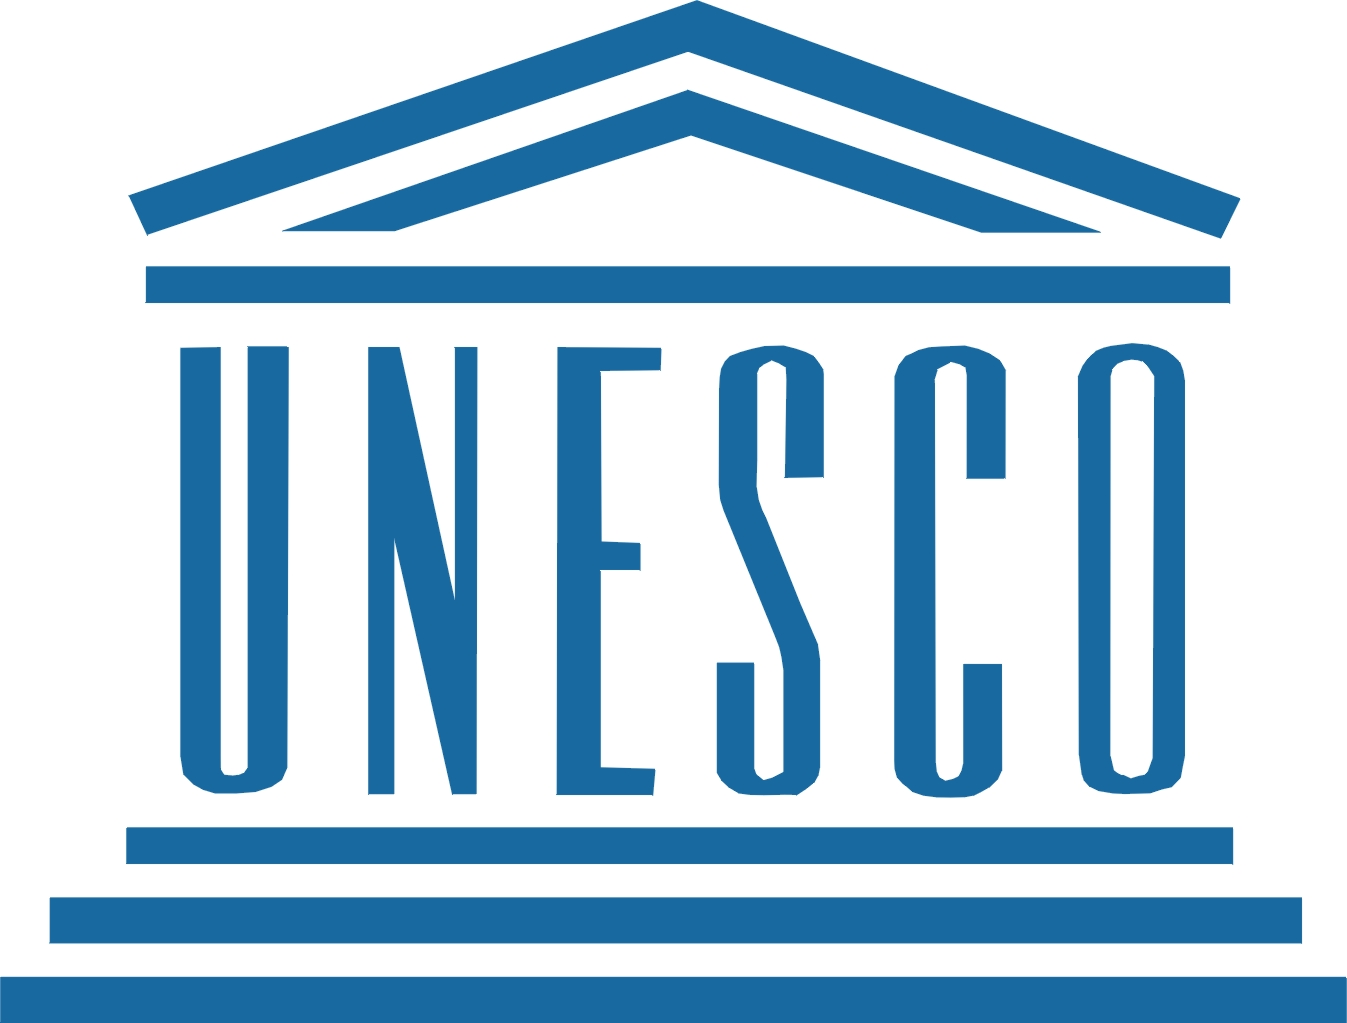 UNESCO launches campaign to promote girls’ education